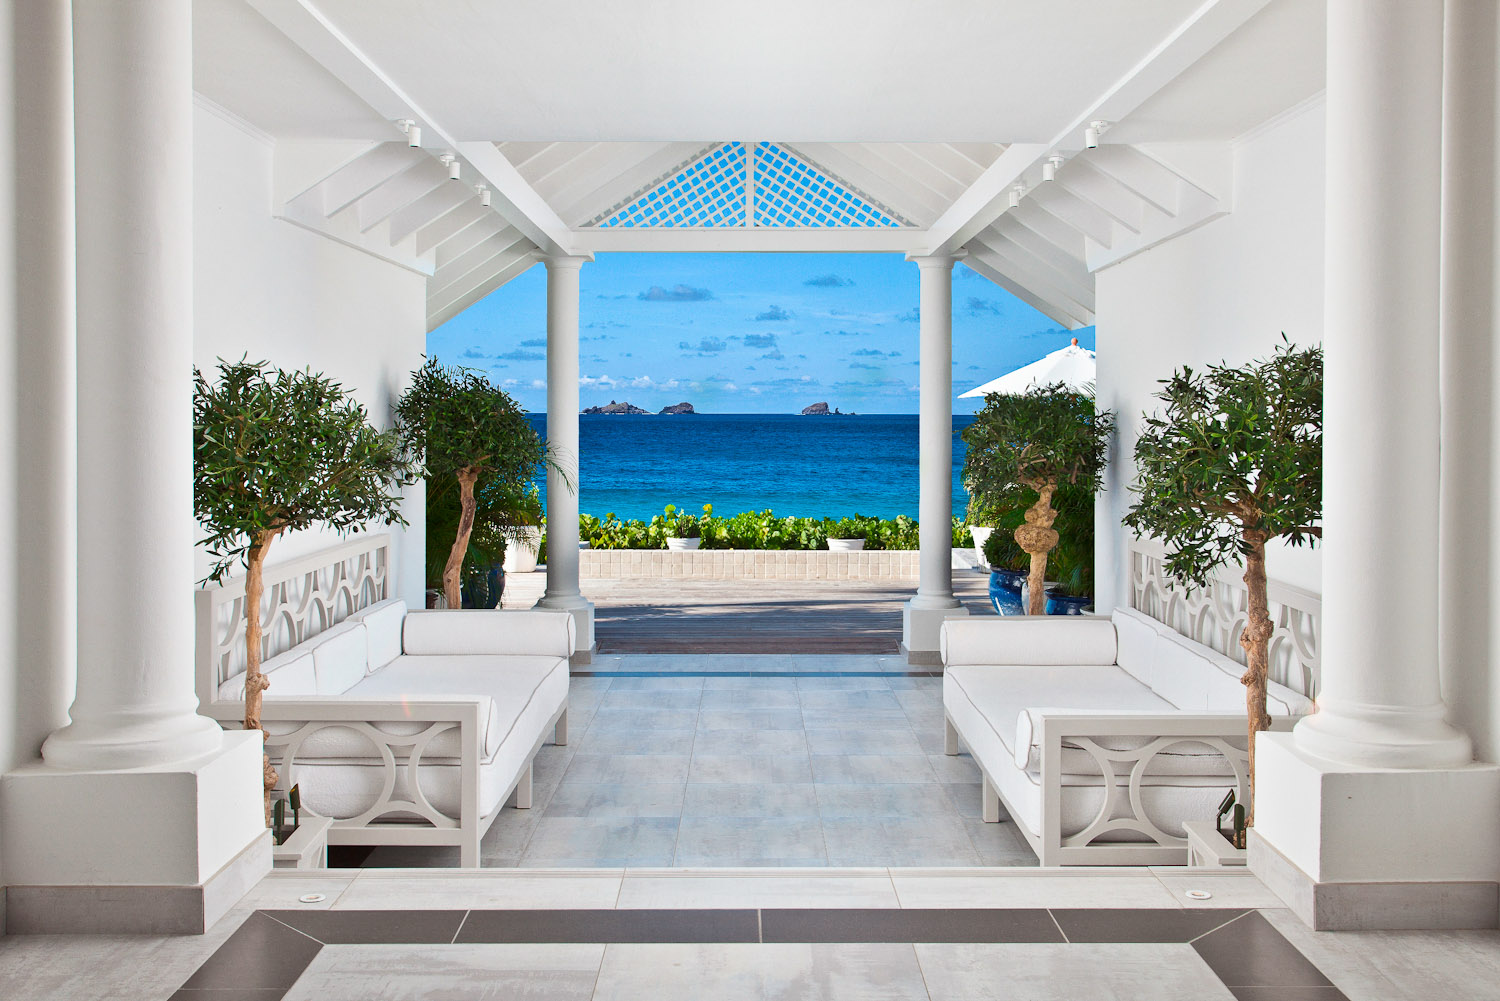 Where to Stay on St. Barth